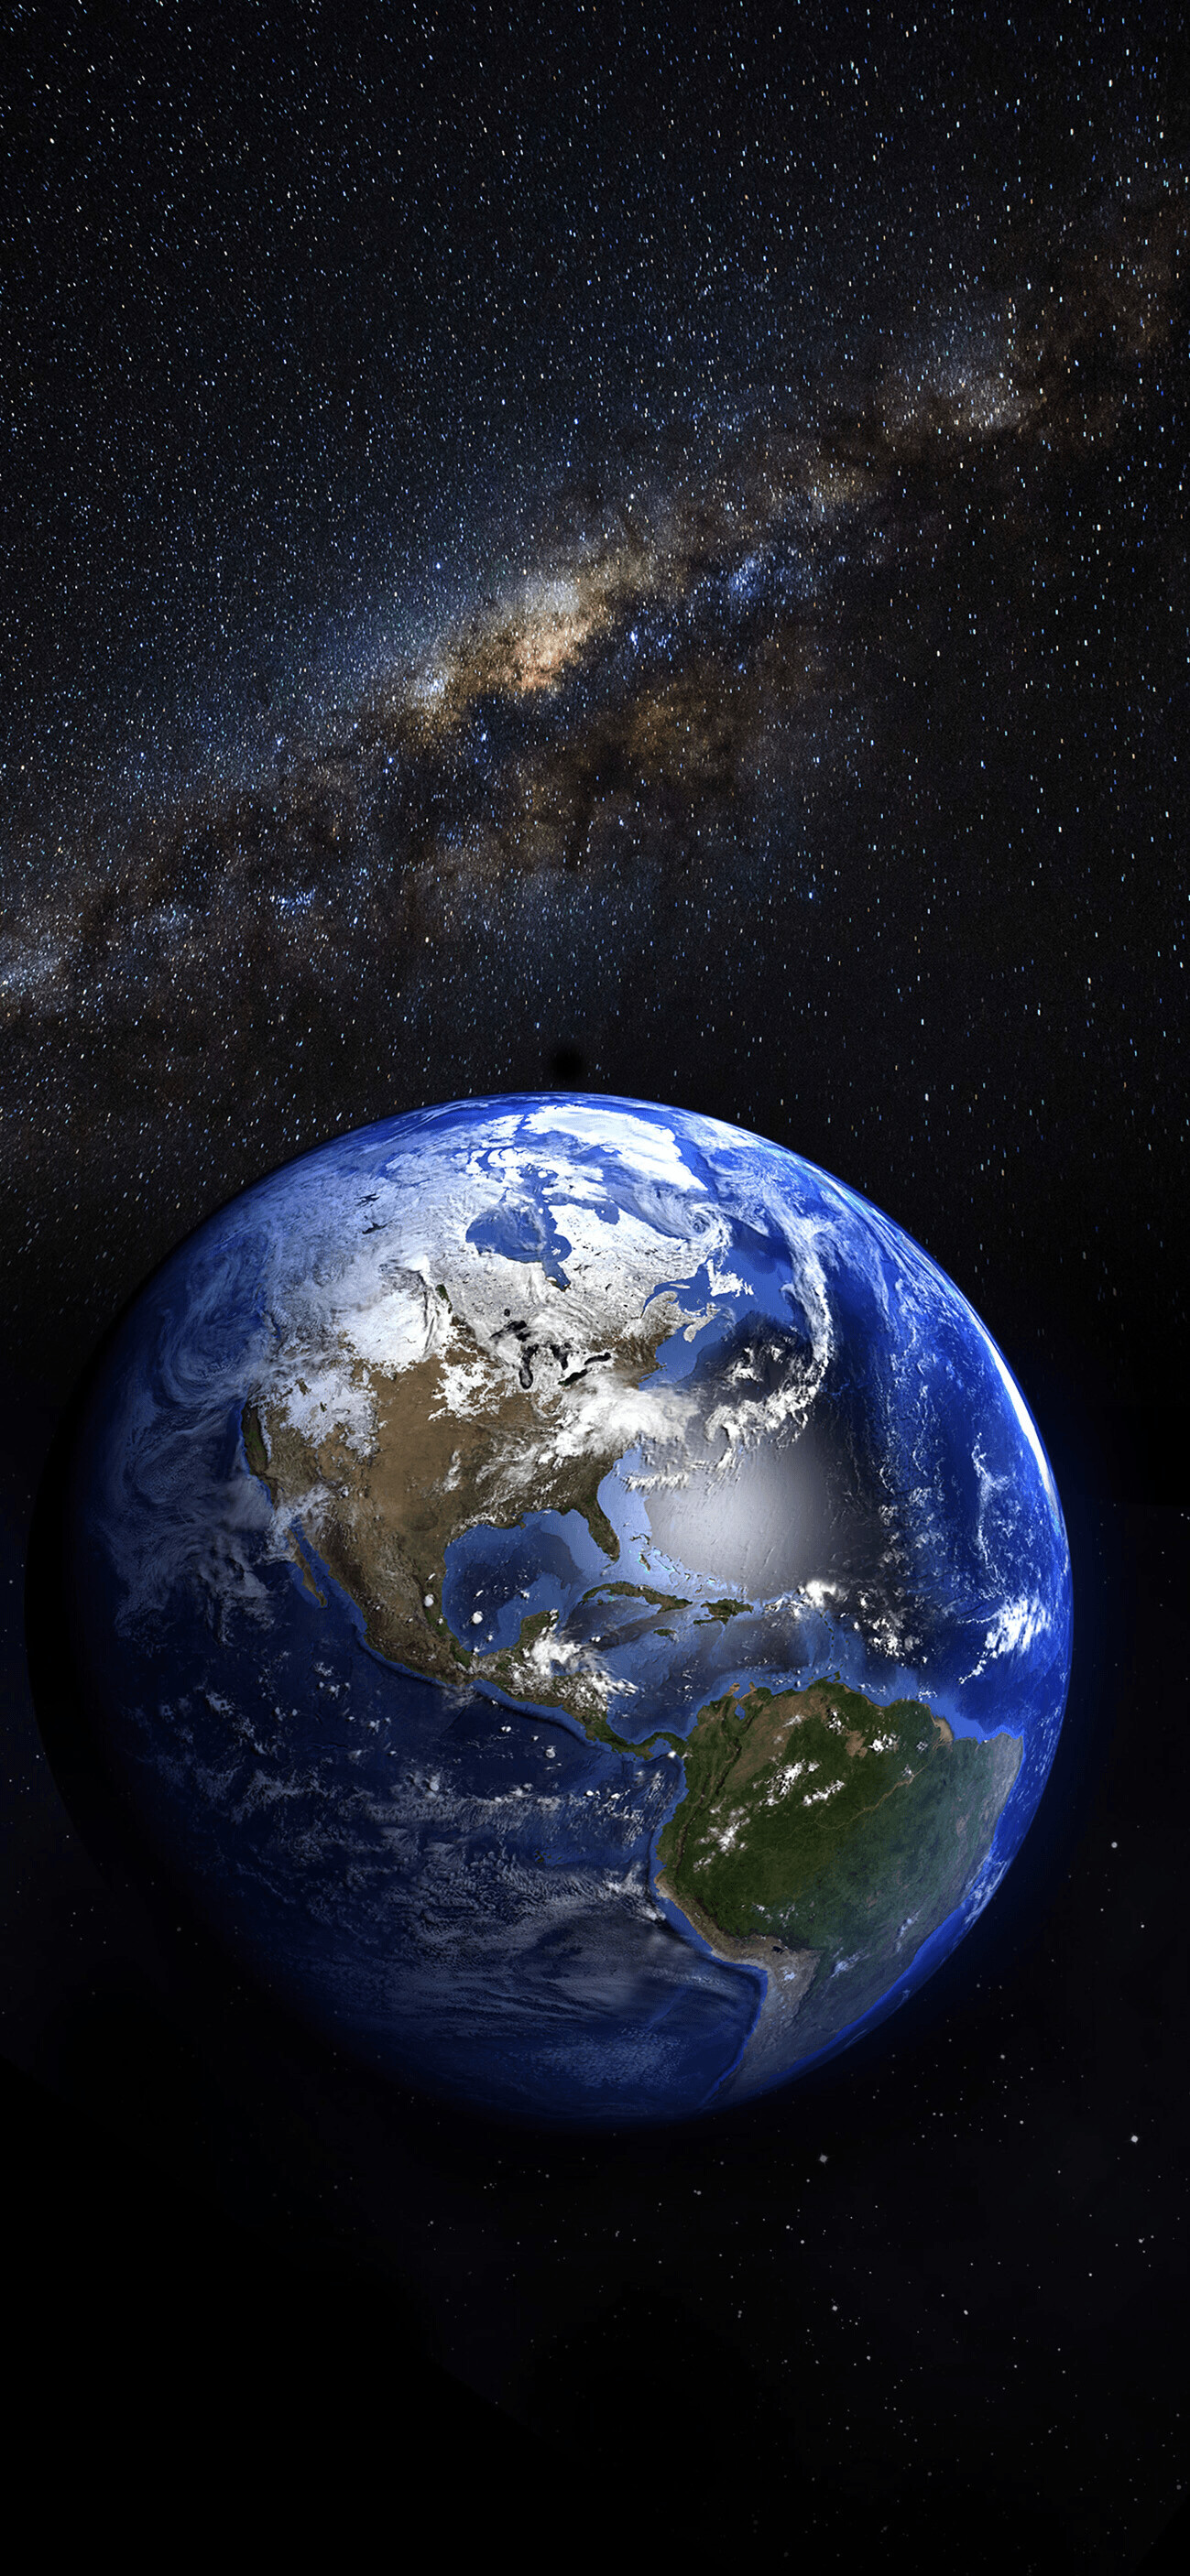 Earth: Oceans cover 71% of the planet's surface, Solar System. 1300x2820 HD Wallpaper.